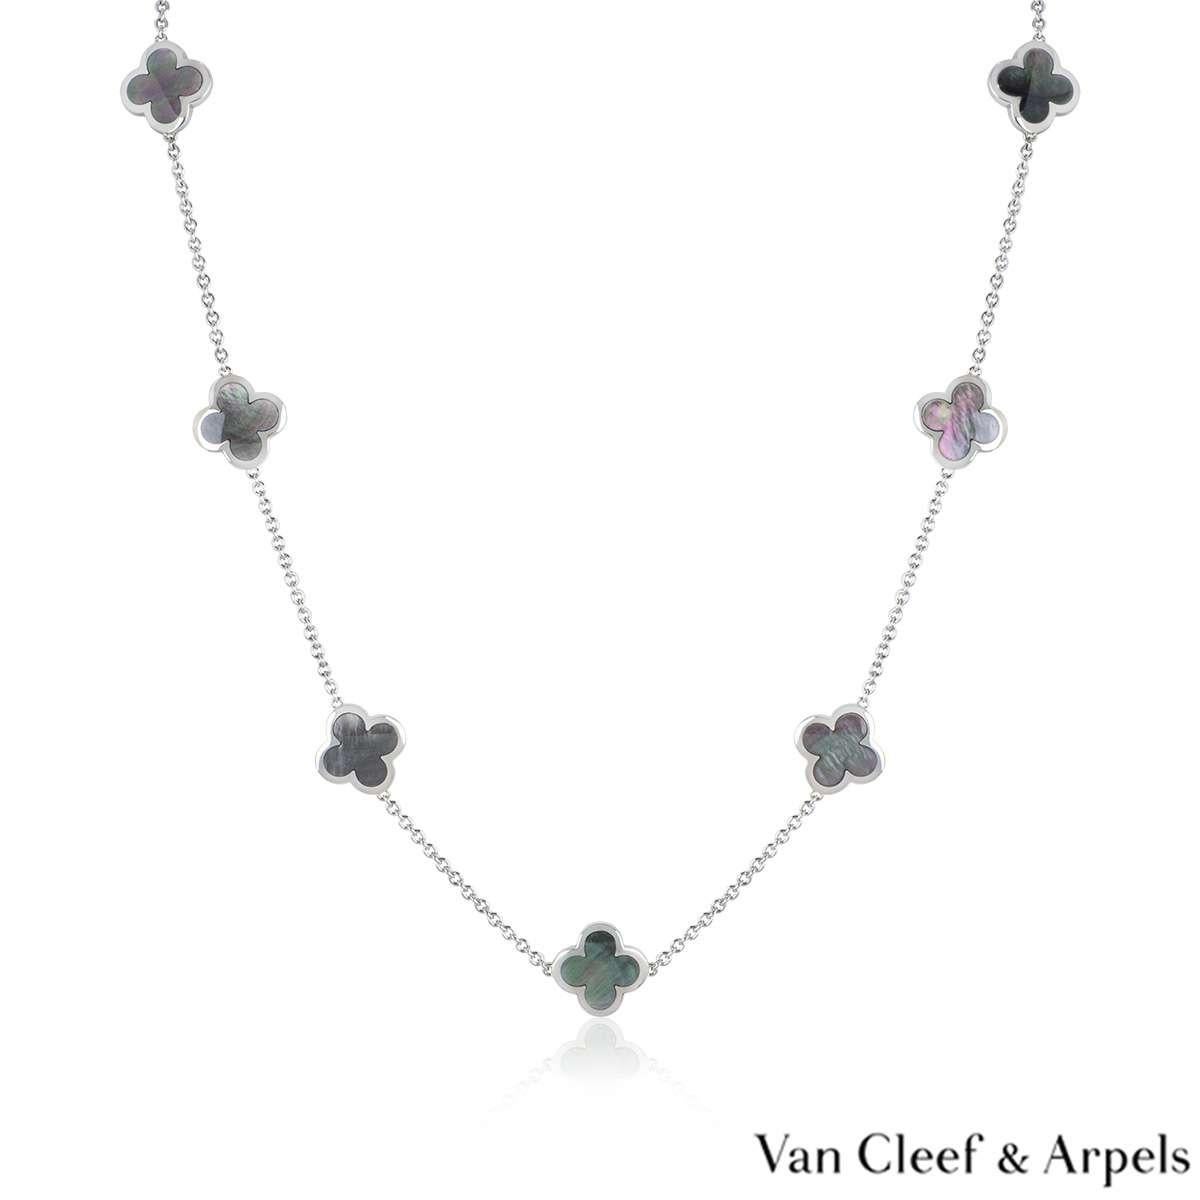 An 18k white gold Pure Alhambra necklace by Van Cleef & Arpels. The necklace is composed of 14 iconic four leaf clover motifs, set to the centre with grey mother of pearl inlays and a polished outer edge. The necklace measures 32 inches in length